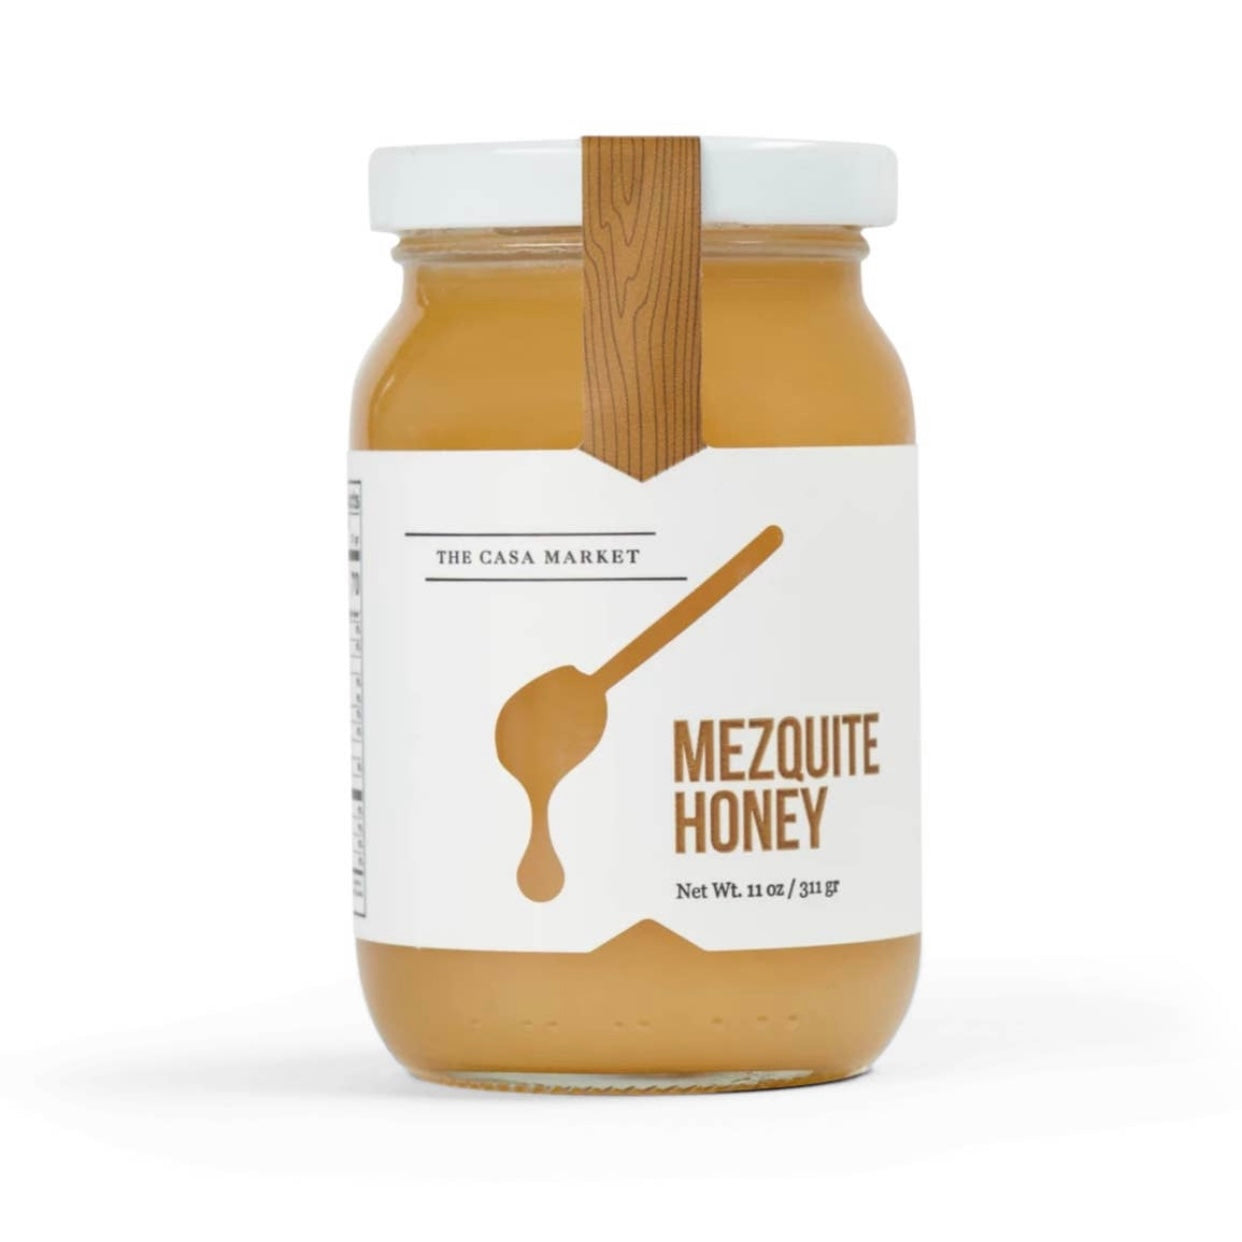 Large Mezquite Honey in an 11 ounce jar with a white branded label that features a honey dipper.